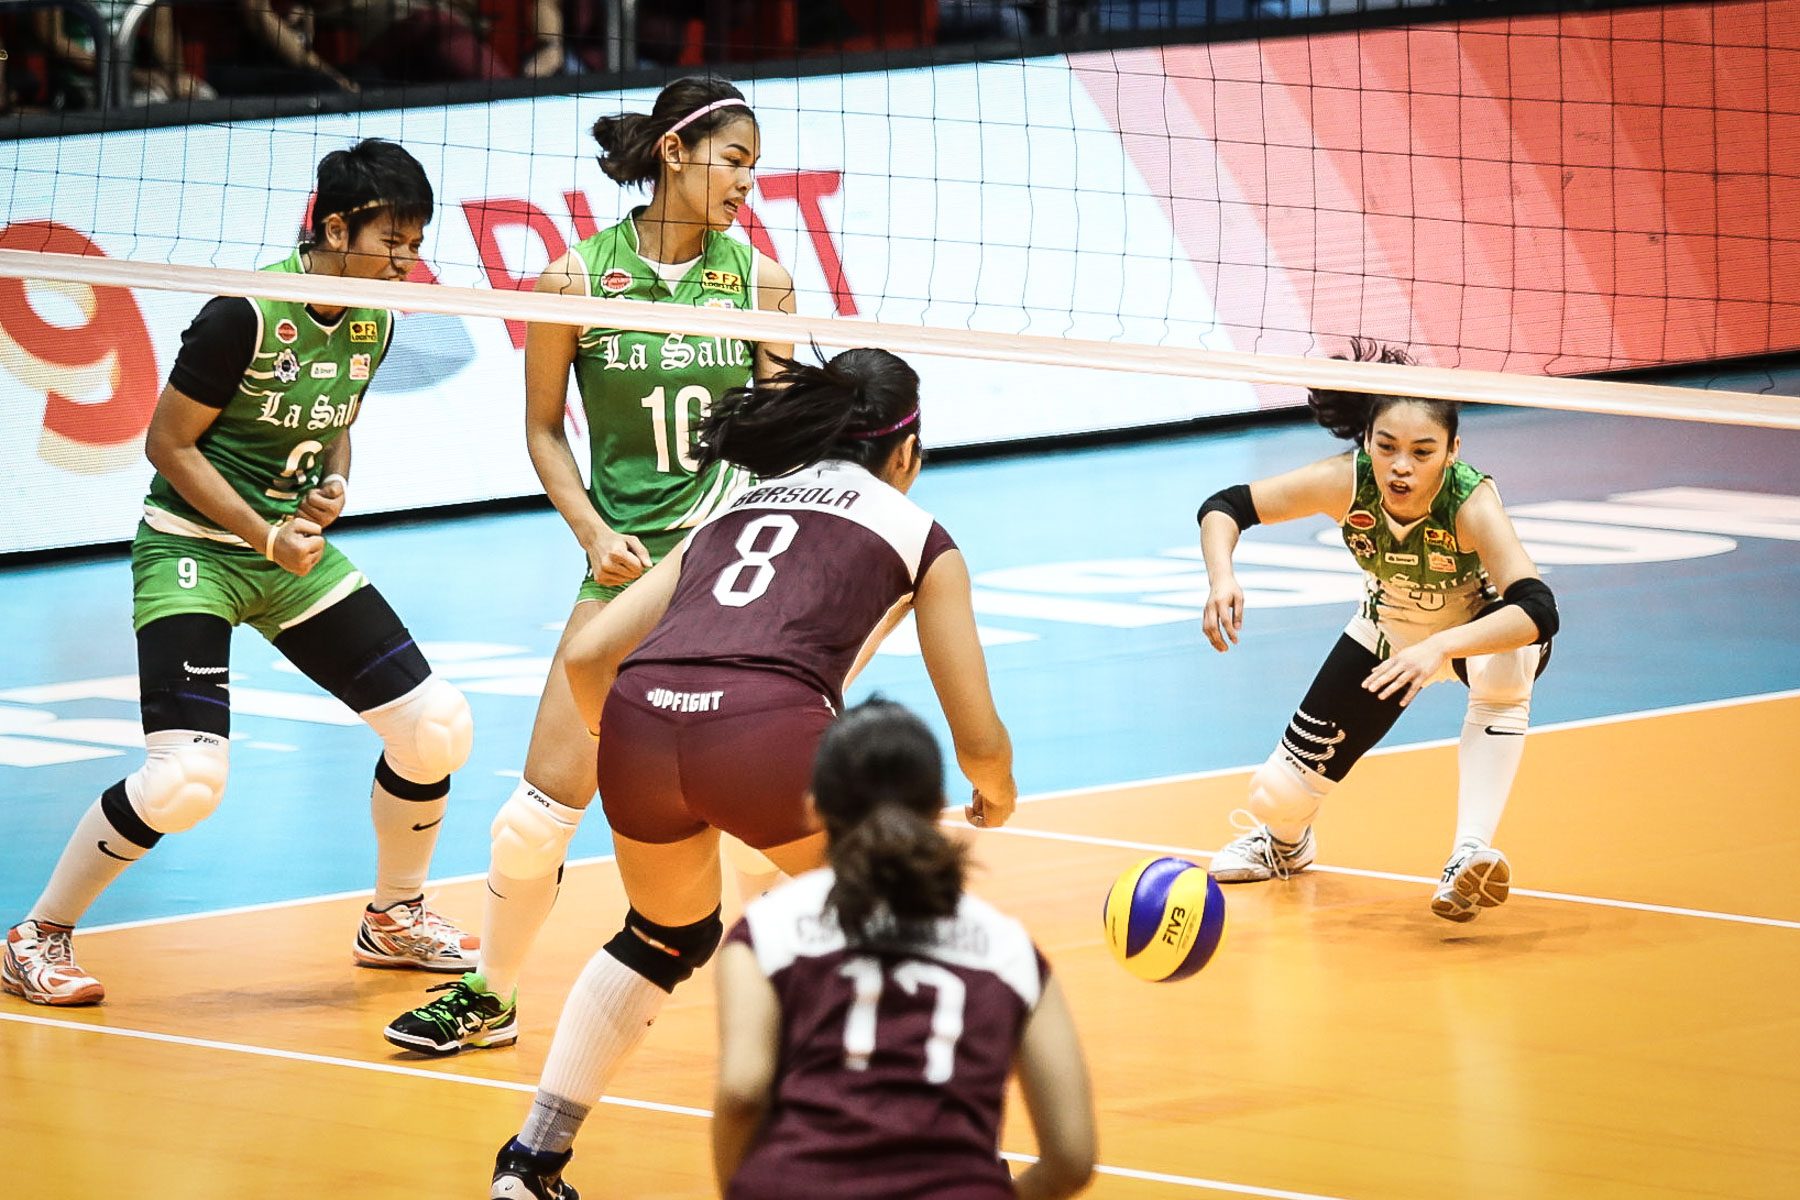 After humbling defeat to UP, Lady Spikers must answer wake-up call